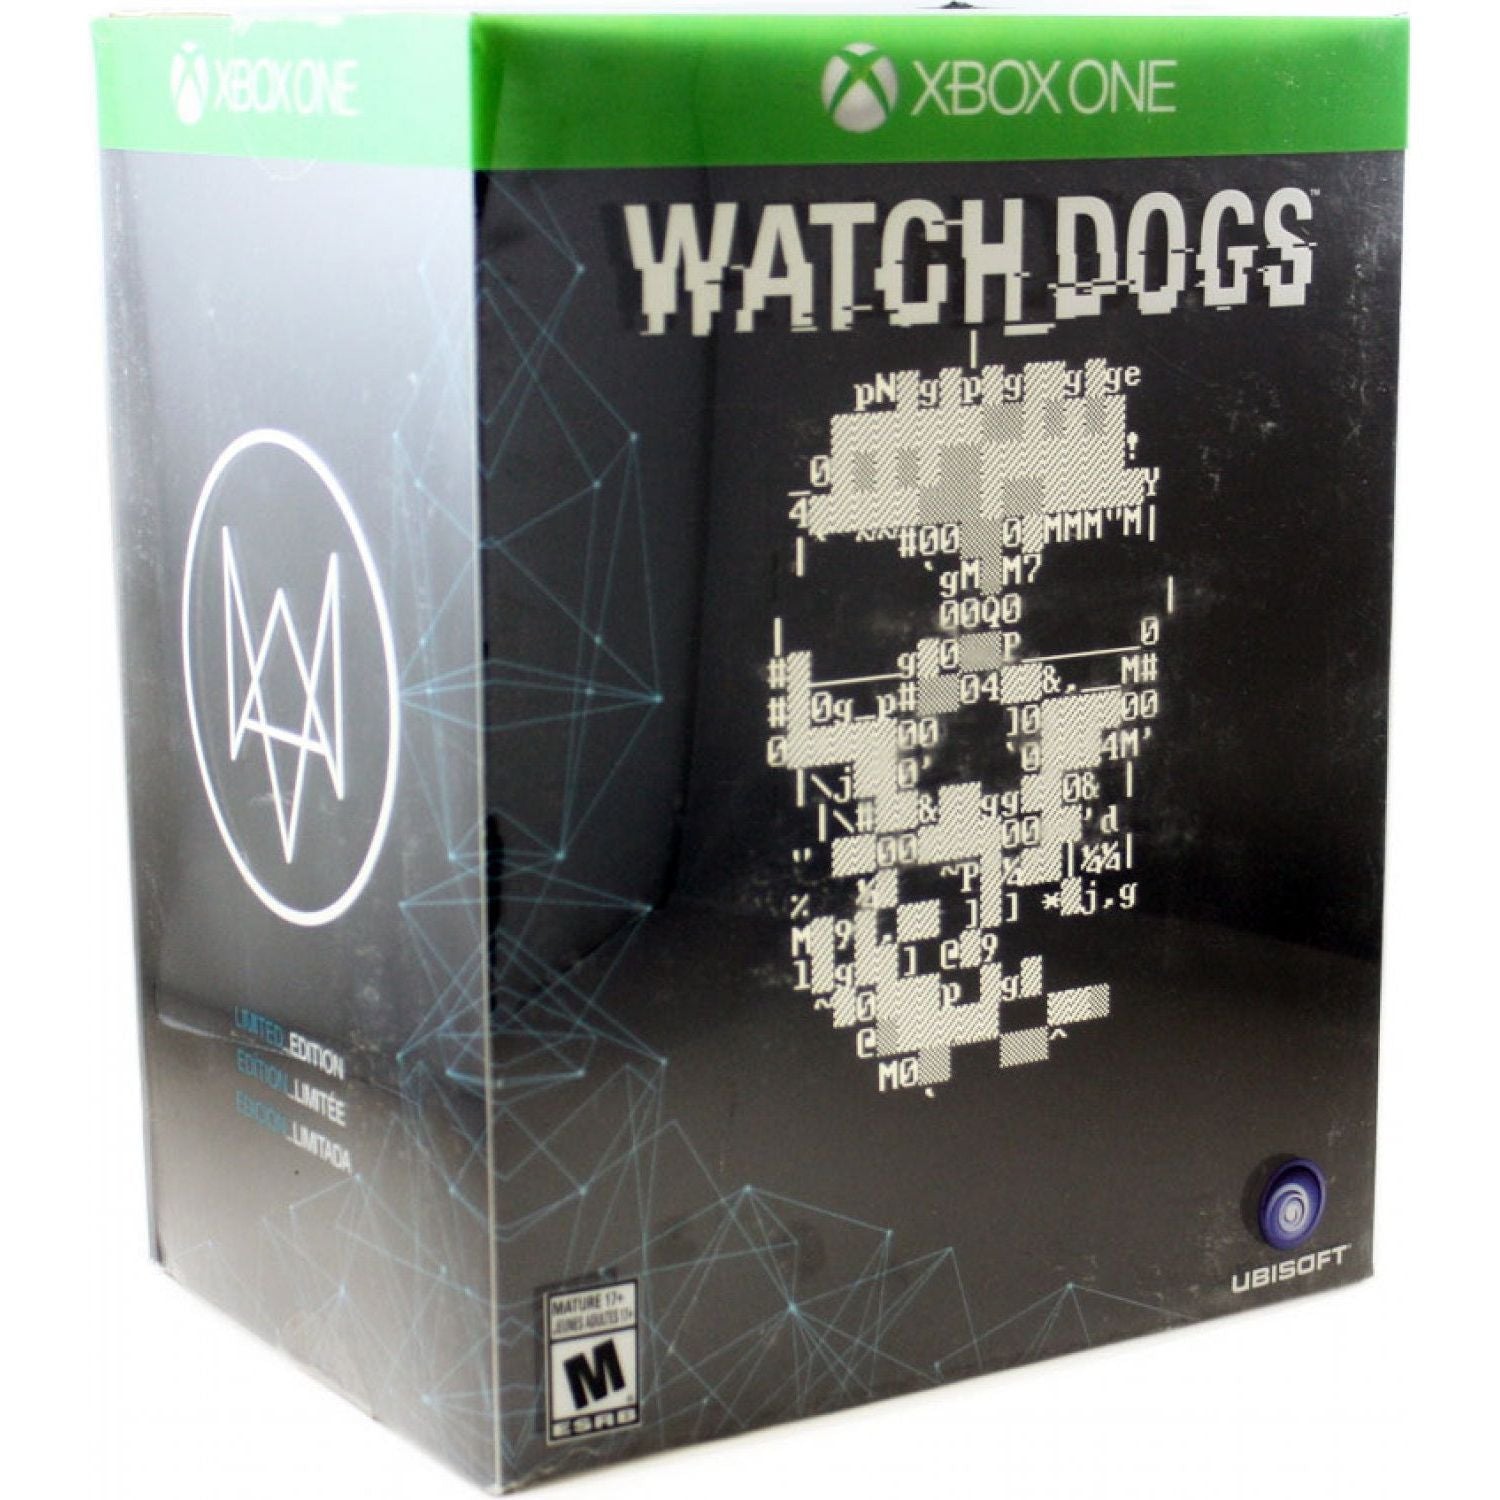 XBOX ONE - Watch Dogs Limited Edition (Sealed)